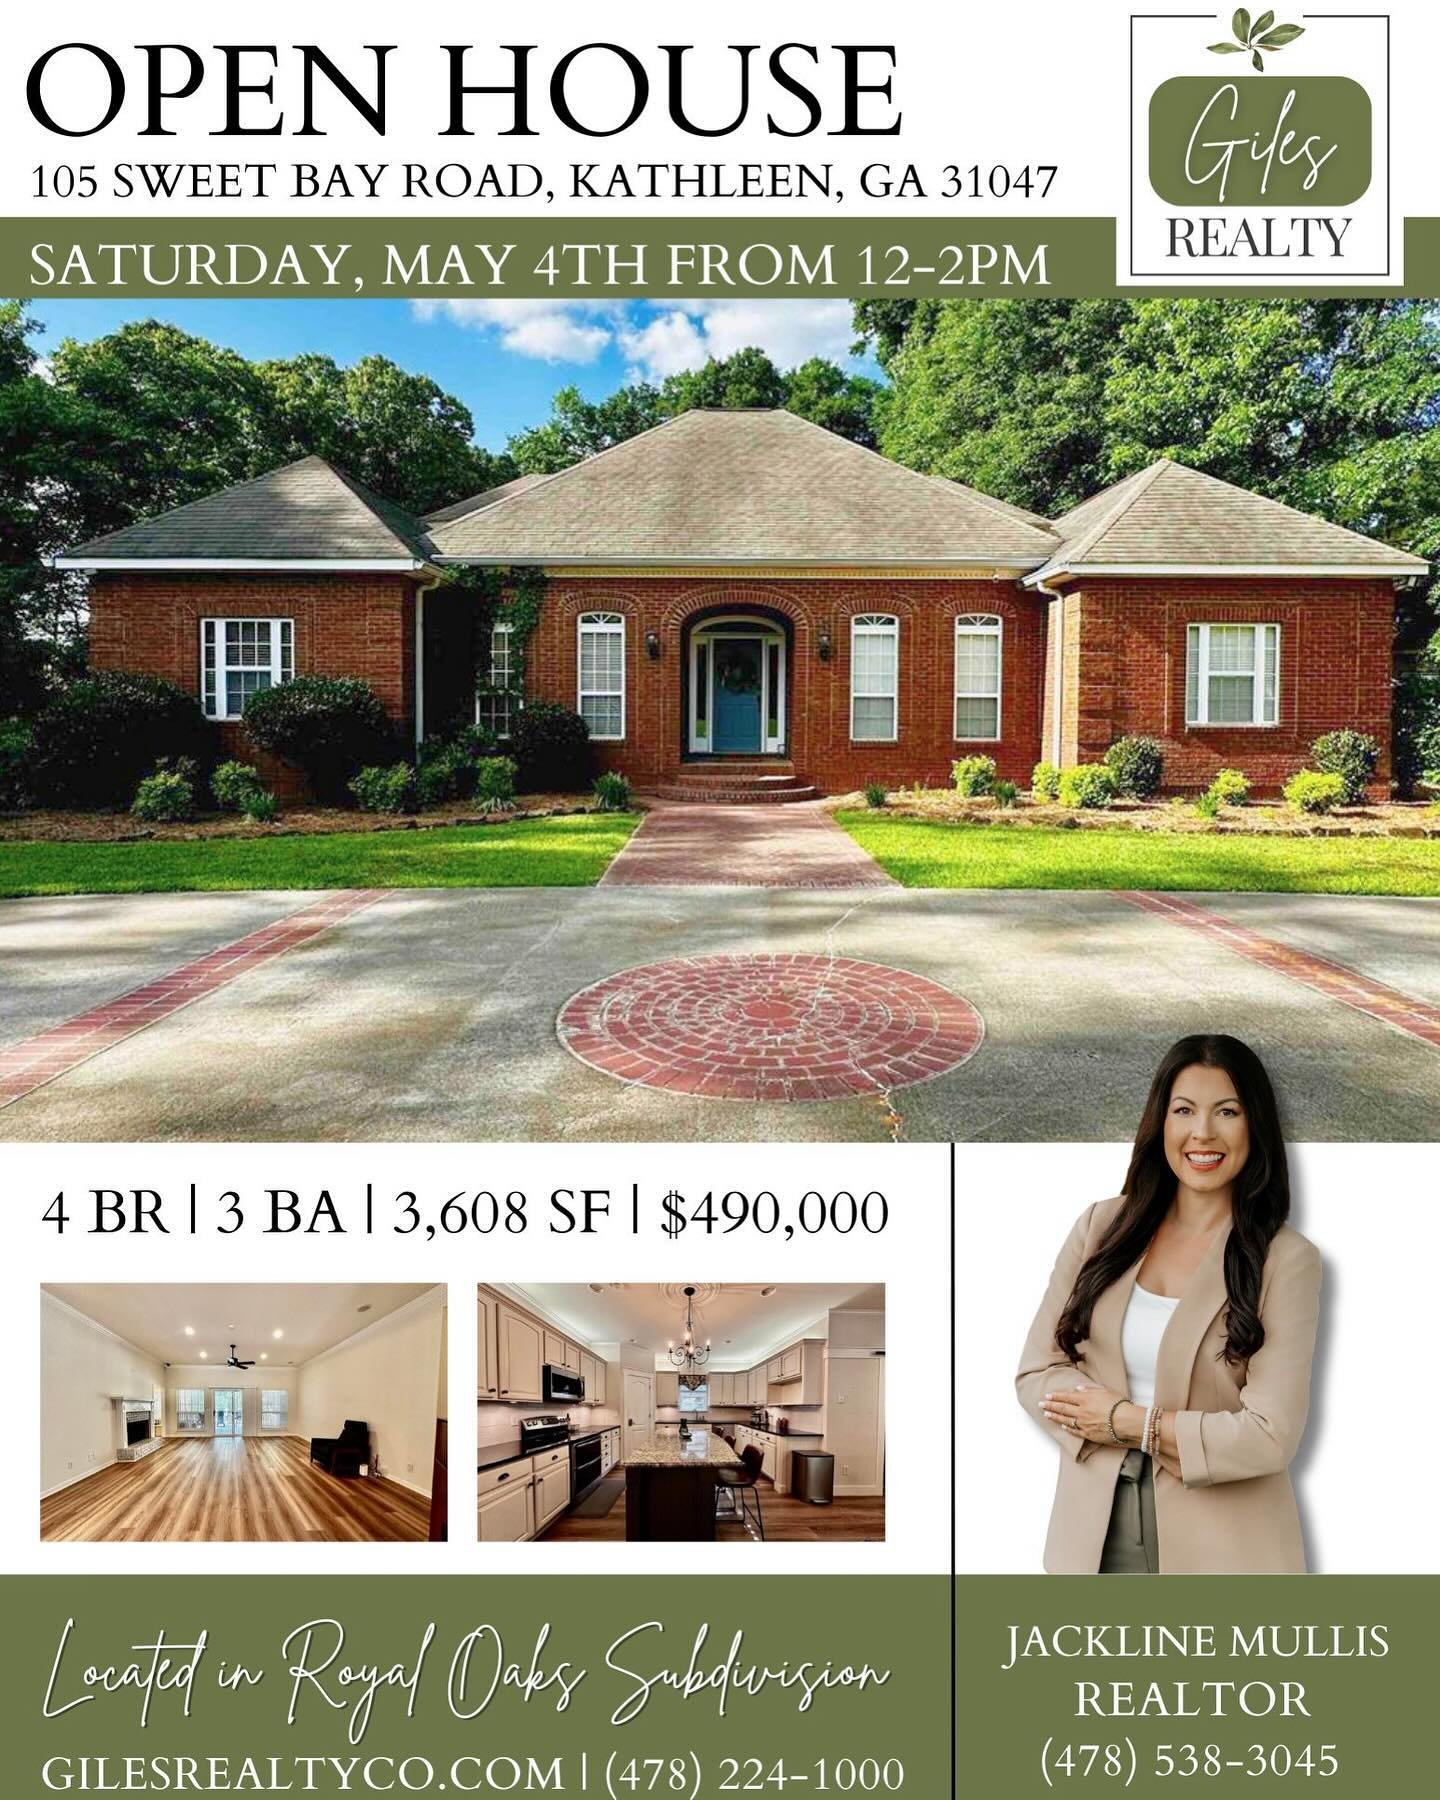 Open TODAY!

Come tour 105 Sweet Bay Road, Kathleen GA 31047 from 12-2pm
Jackline Mullis, Realtor  looks forward to seeing you there!
Contact: (478) 538-3045 | Office: (478) 224-1000

Directions: From Perry, North on Houston Lake Rd, left onto Perry 